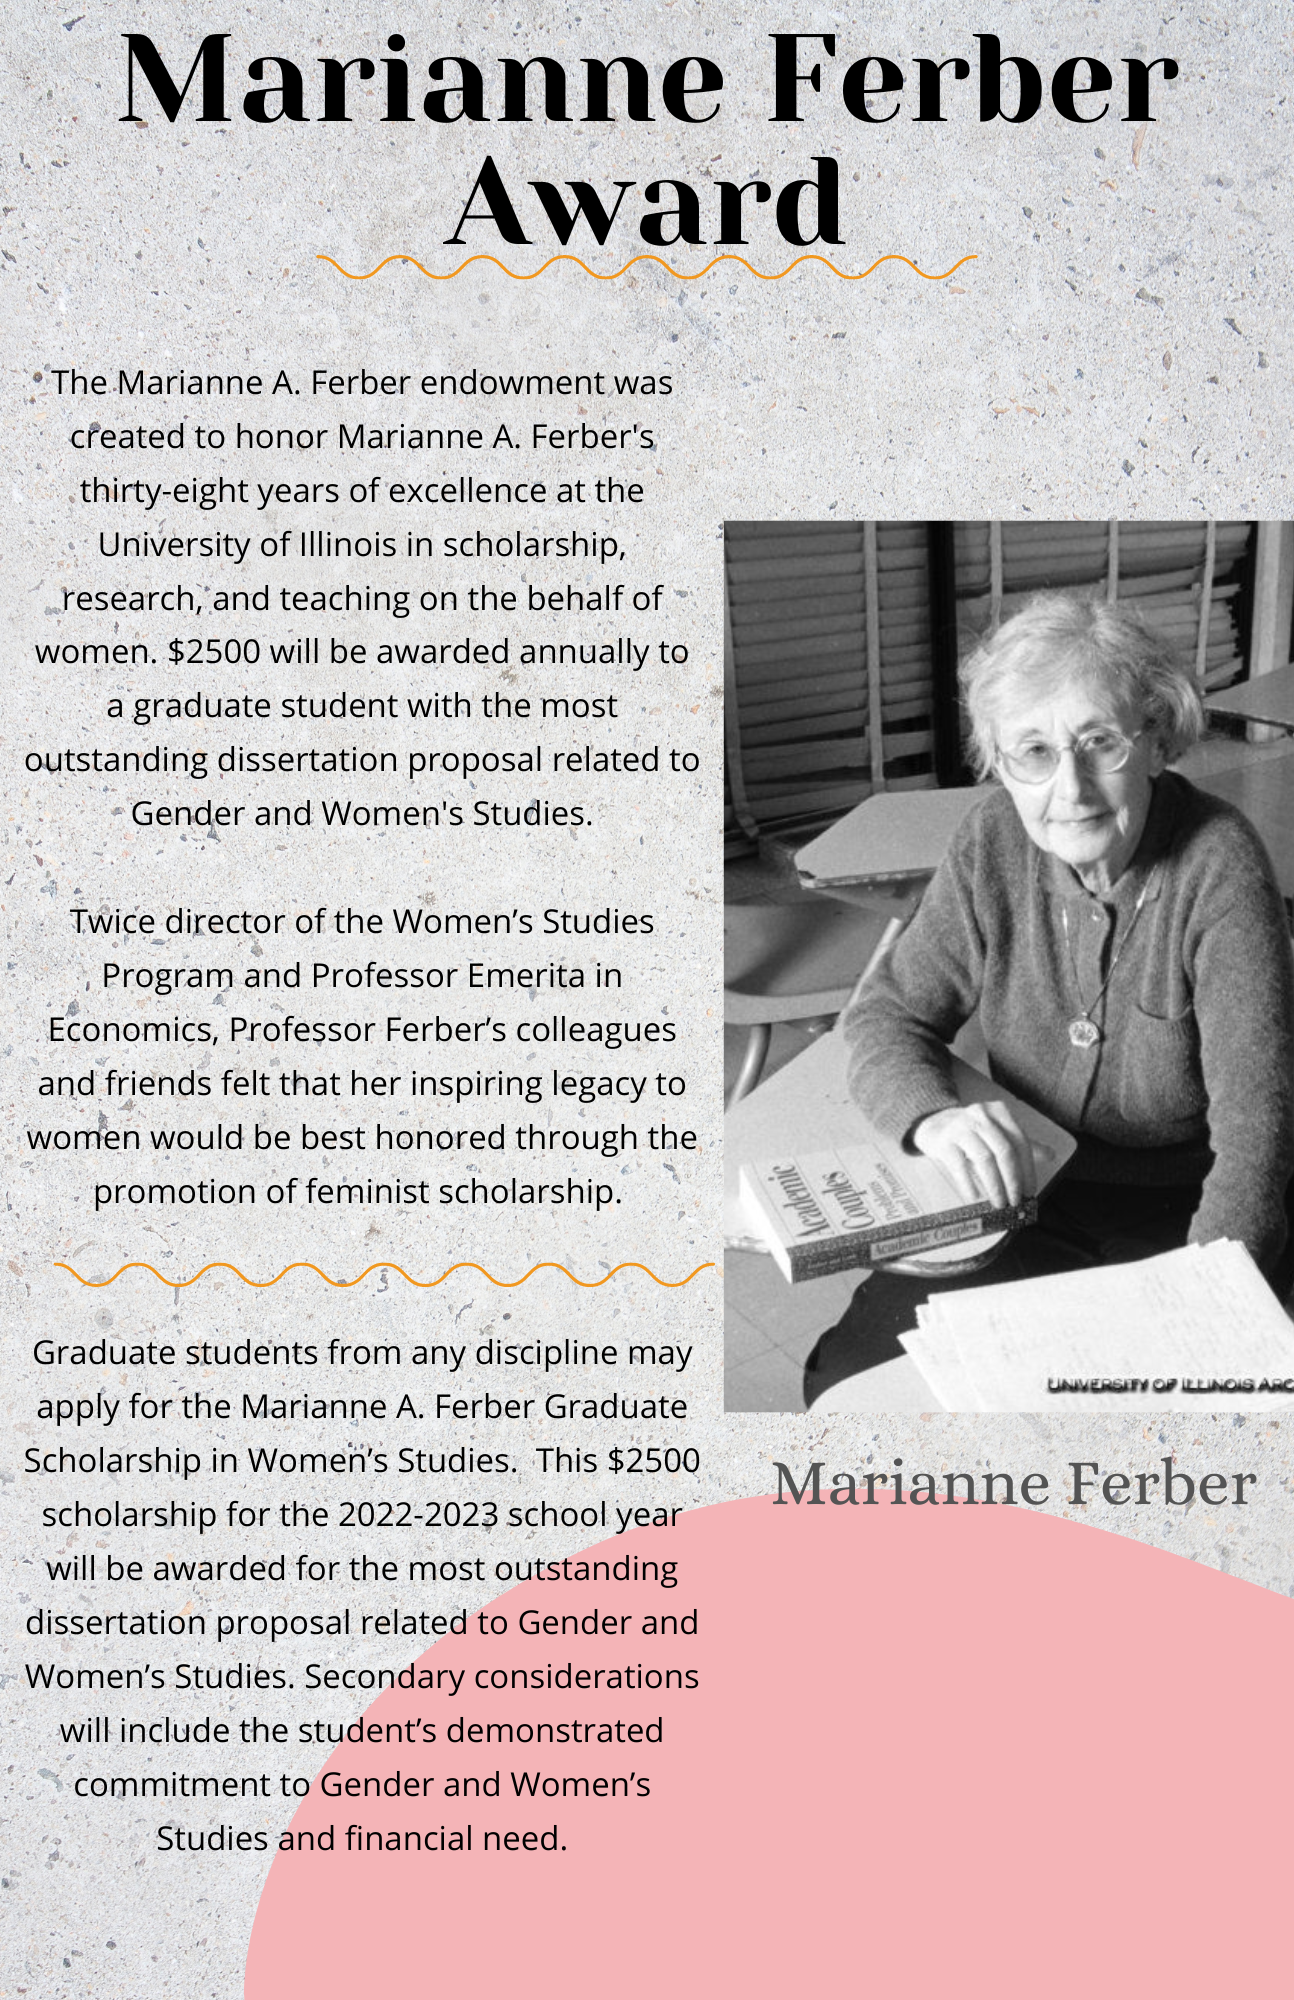 Description of Marianne Ferber Award with photo